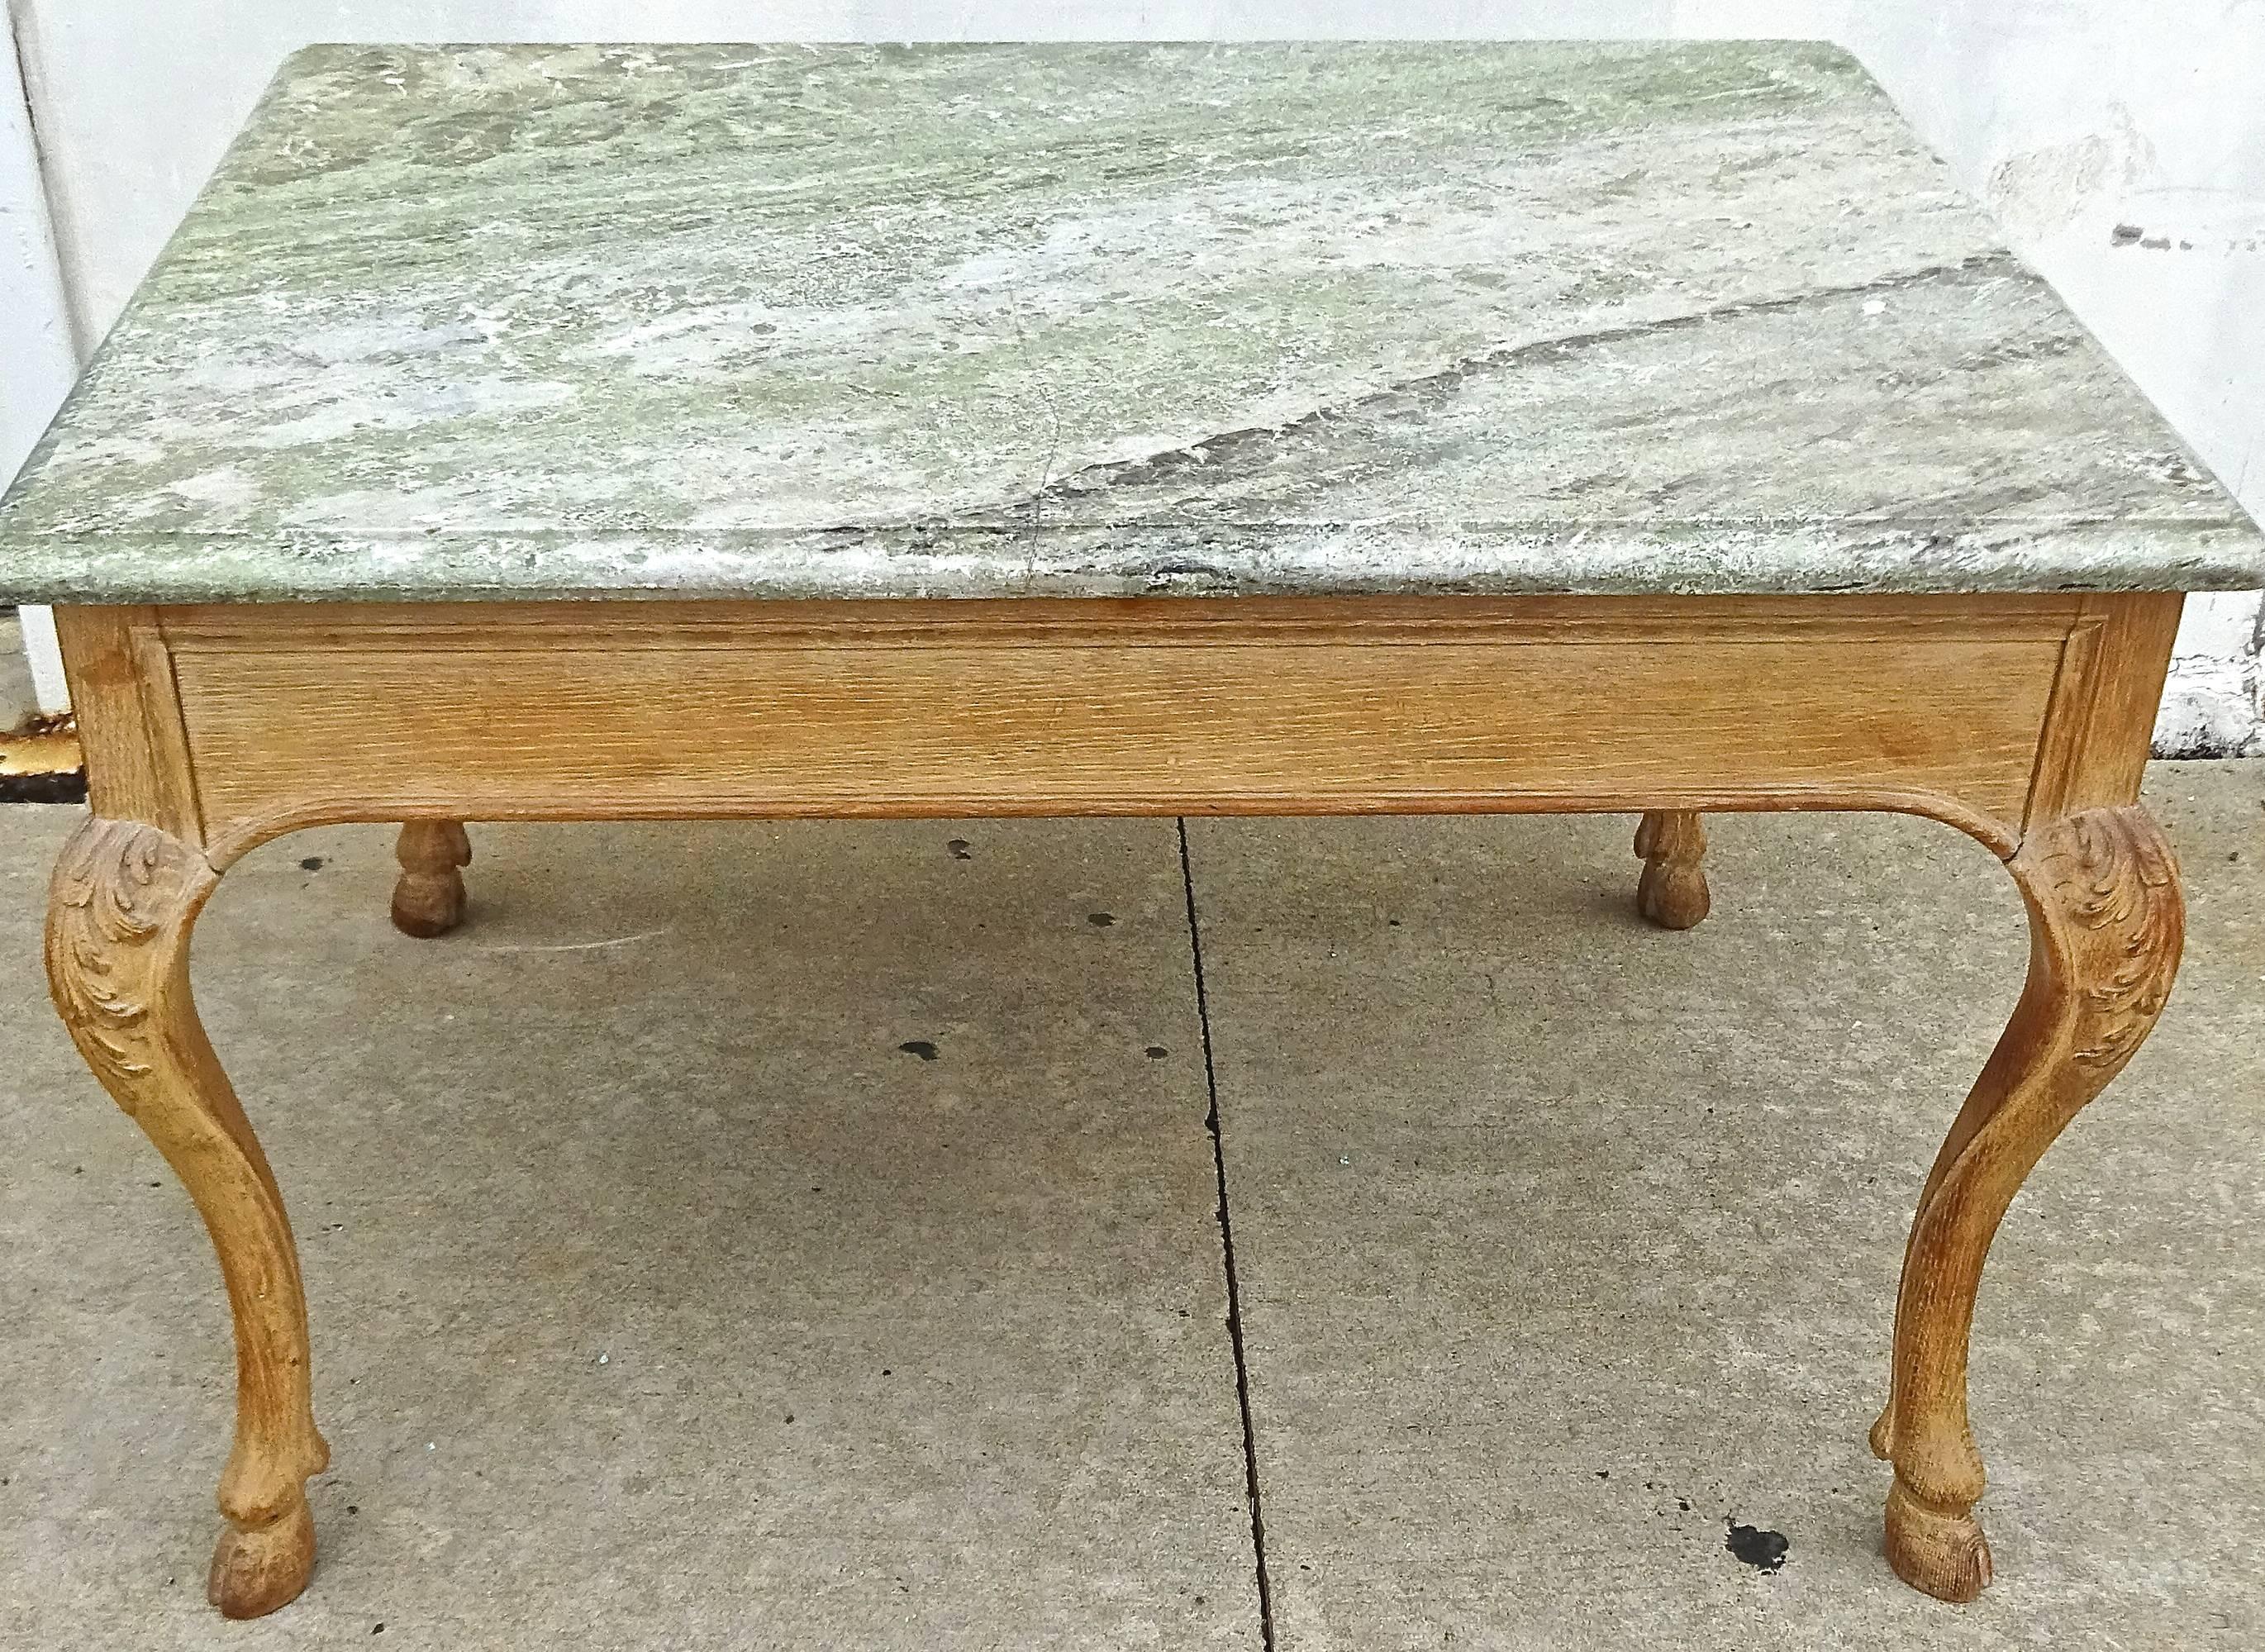 Marvellously chic late 19th century French center or library table with rare thick green specimen marble top. Oak has a unique dry bleached finish with wonderful patina. This table would work well as a centre table, but could also be used as a desk